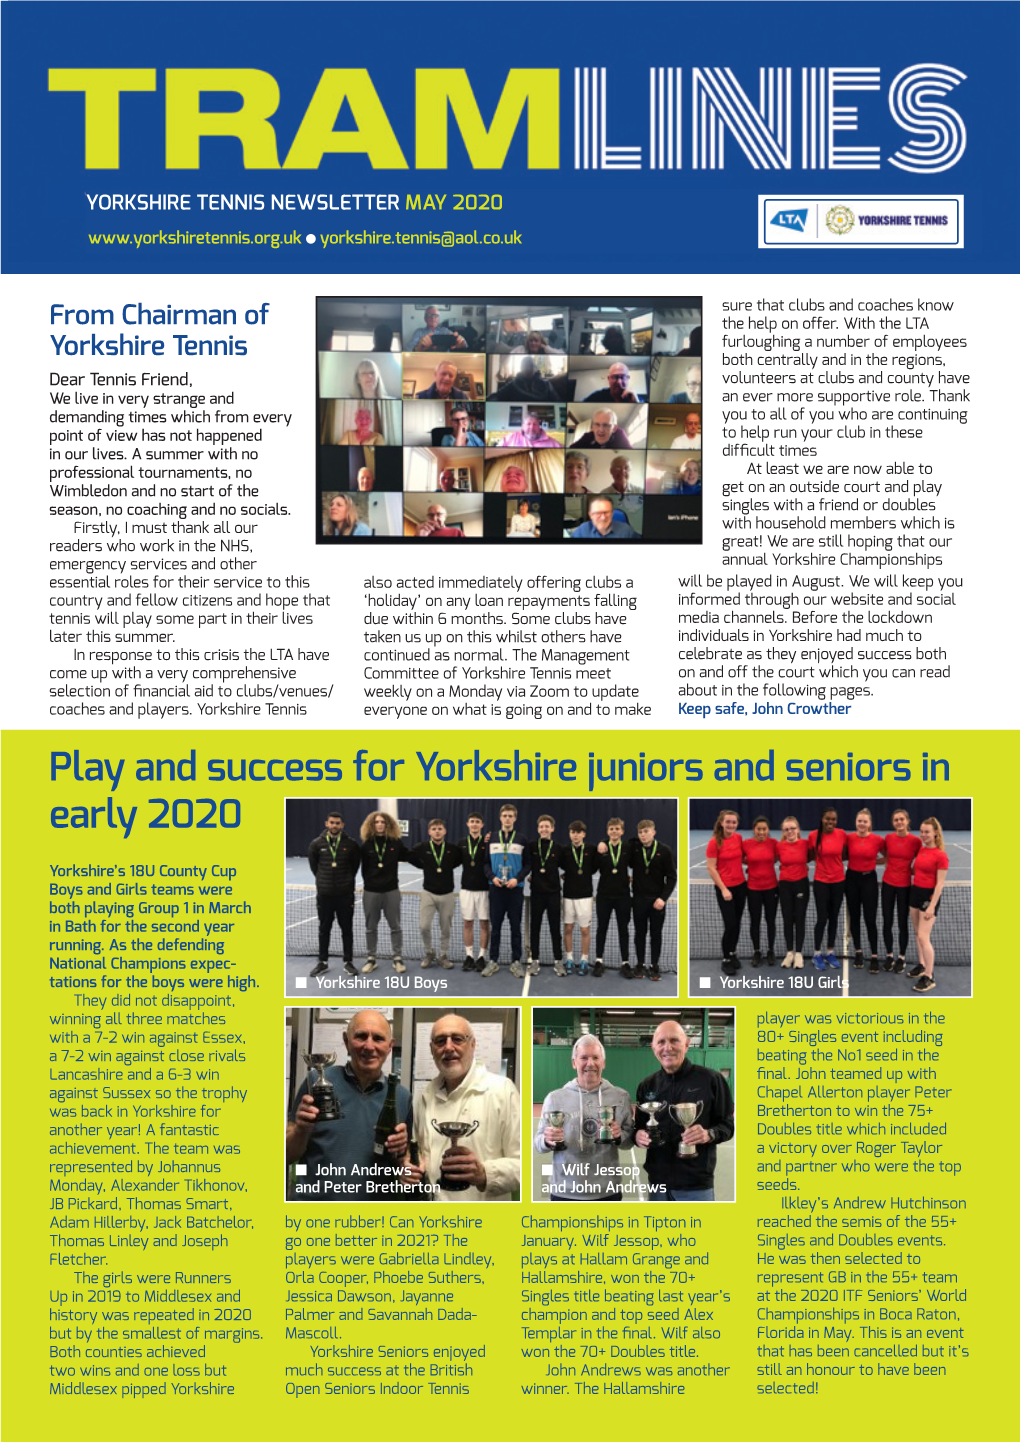 Play and Success for Yorkshire Juniors and Seniors in Early 2020